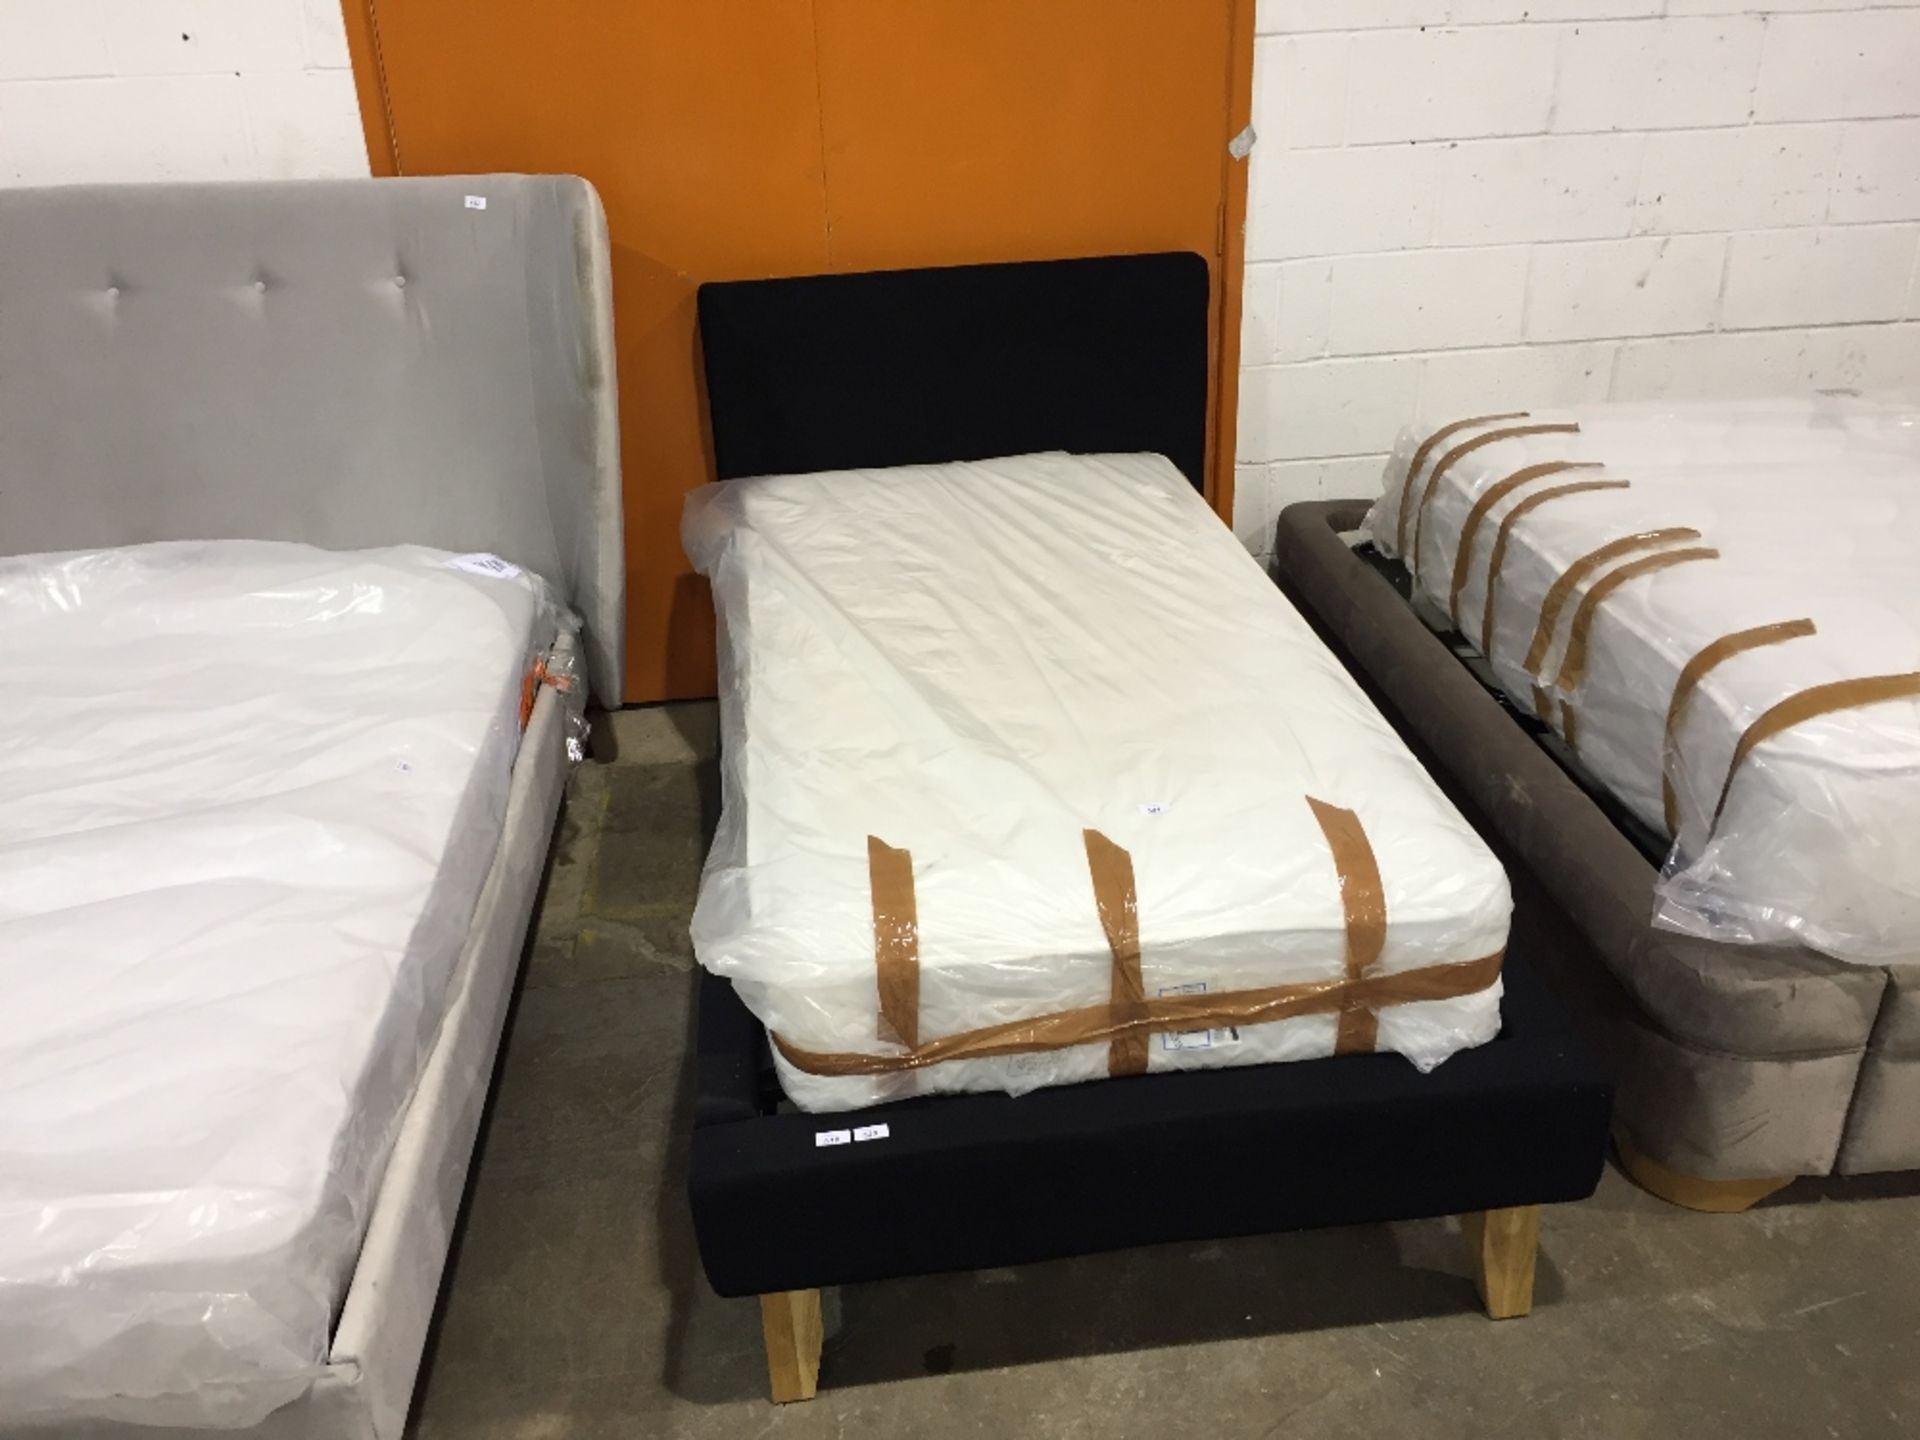 BLACK UPHOLSTERED SINGLE BEDFRAME (unsure if complete boxed)